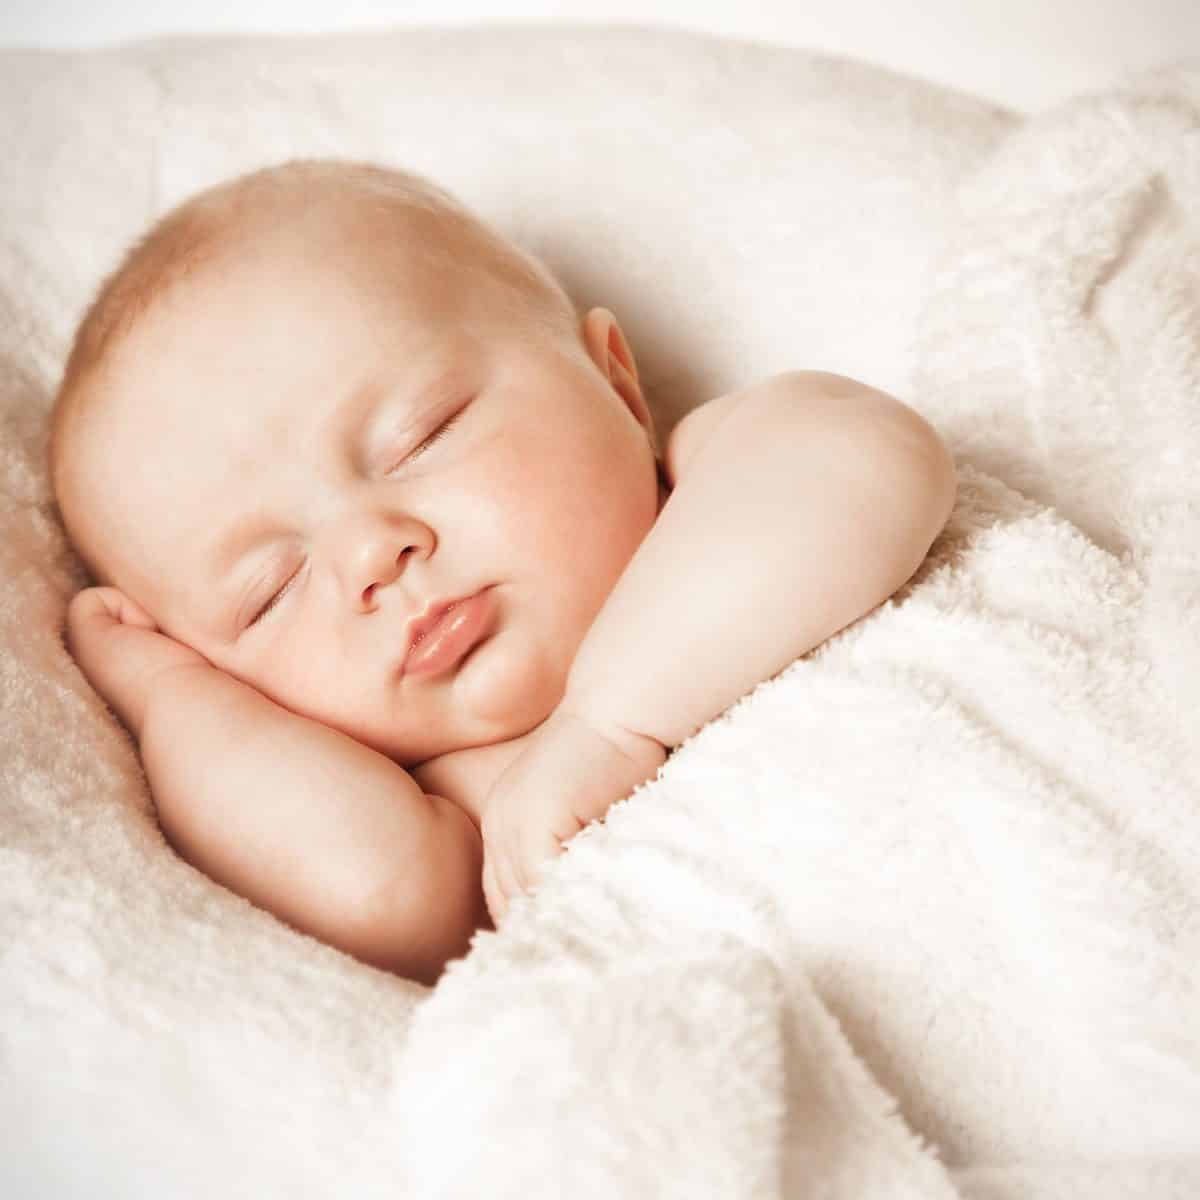 A baby sleeping comfortably with its head resting on one hand and the other across its chest